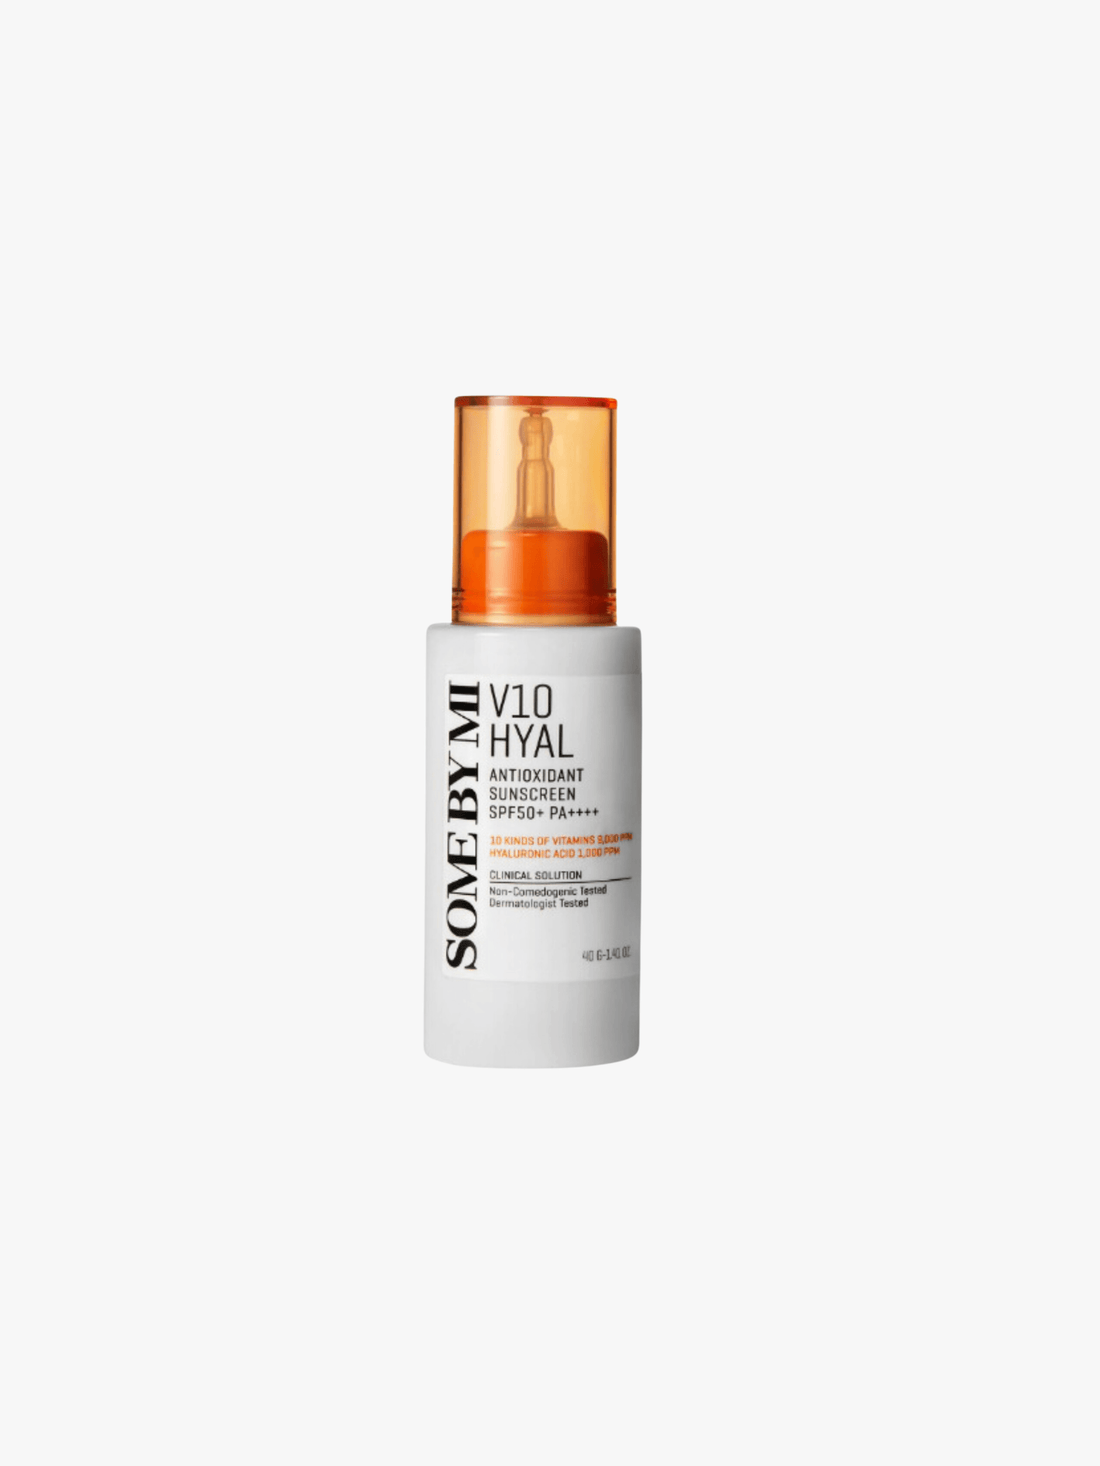 Some By Mi - Protection solaire - V10 HYAL Antioxidant Sunscreen SPF50+